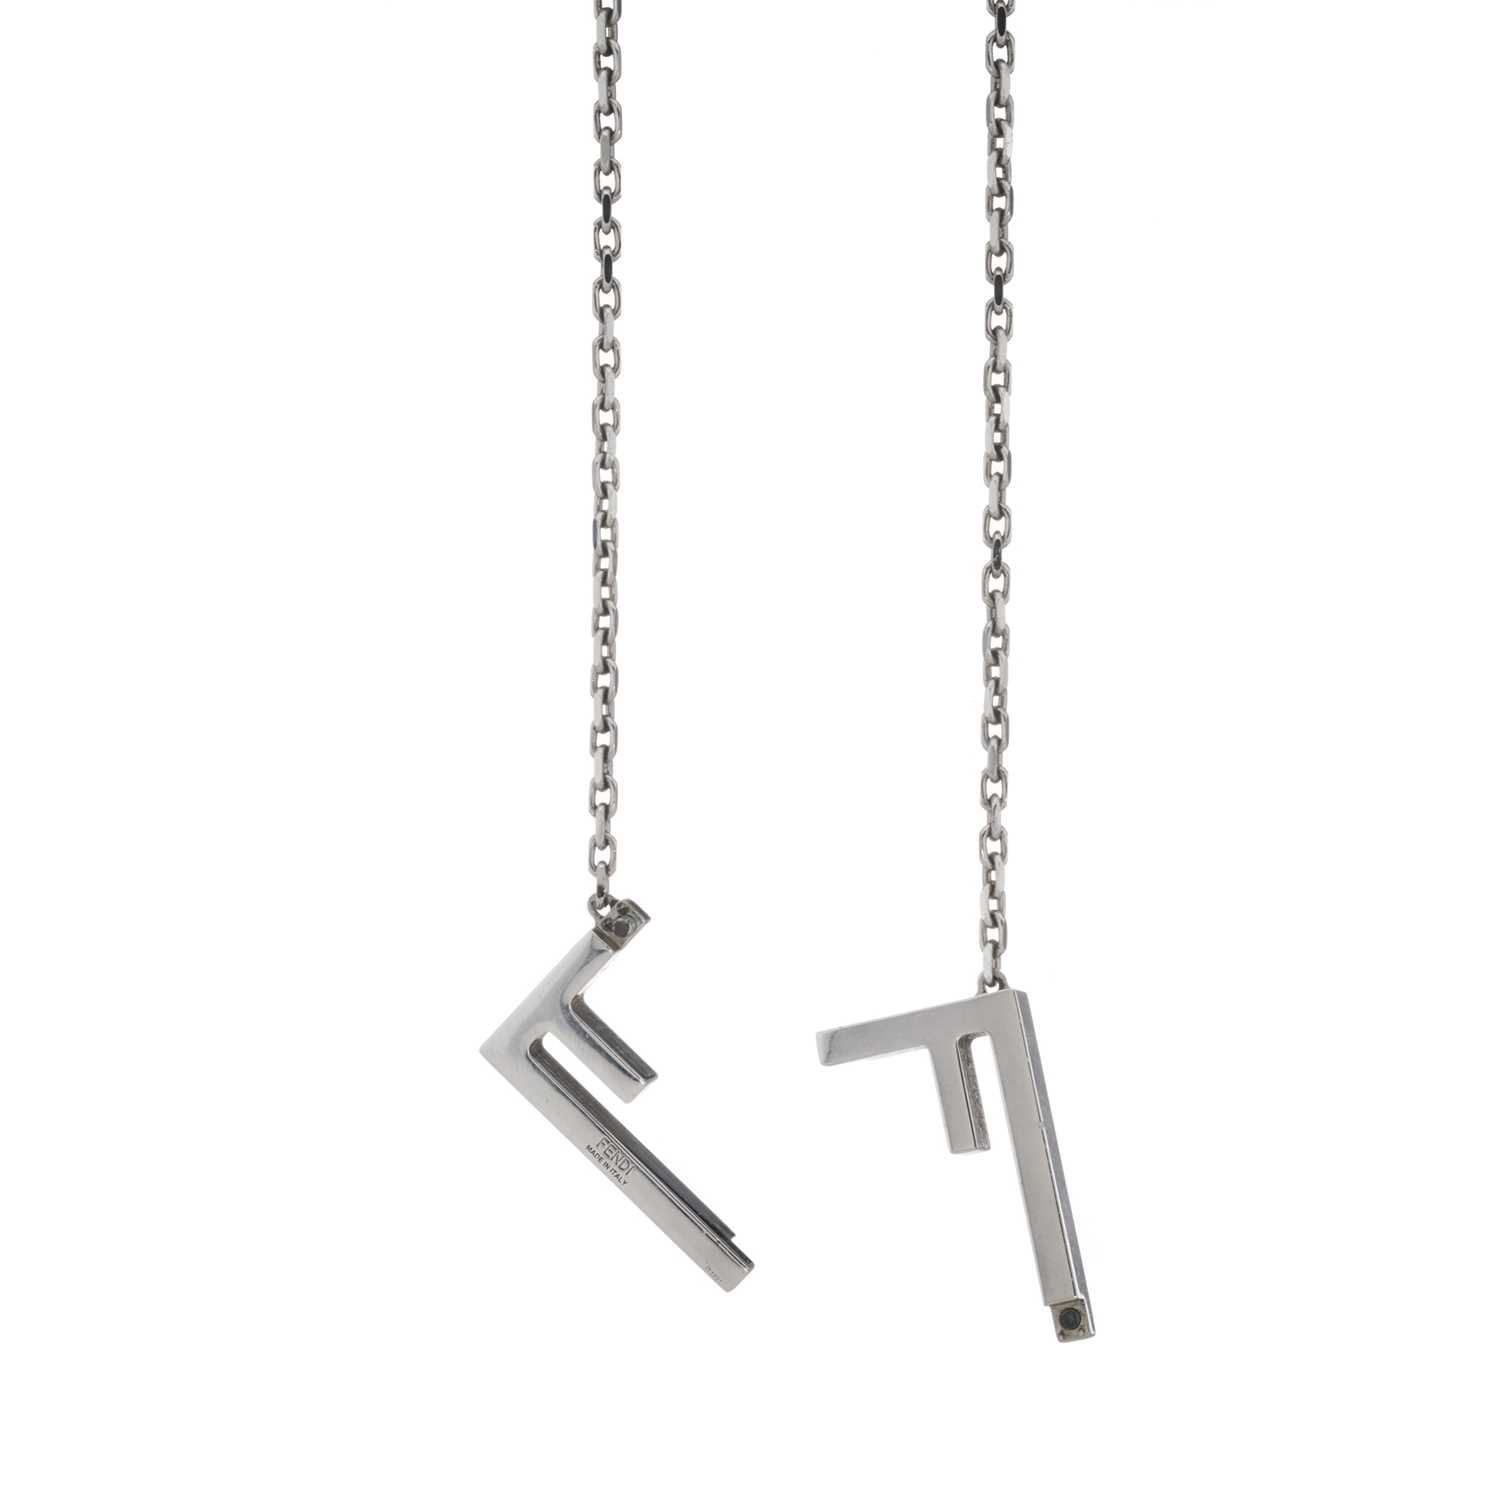 Fendi, a Zucca FF monogram necklace, crafted from silver-tone hardware, featuring the maker's FF - Image 3 of 4